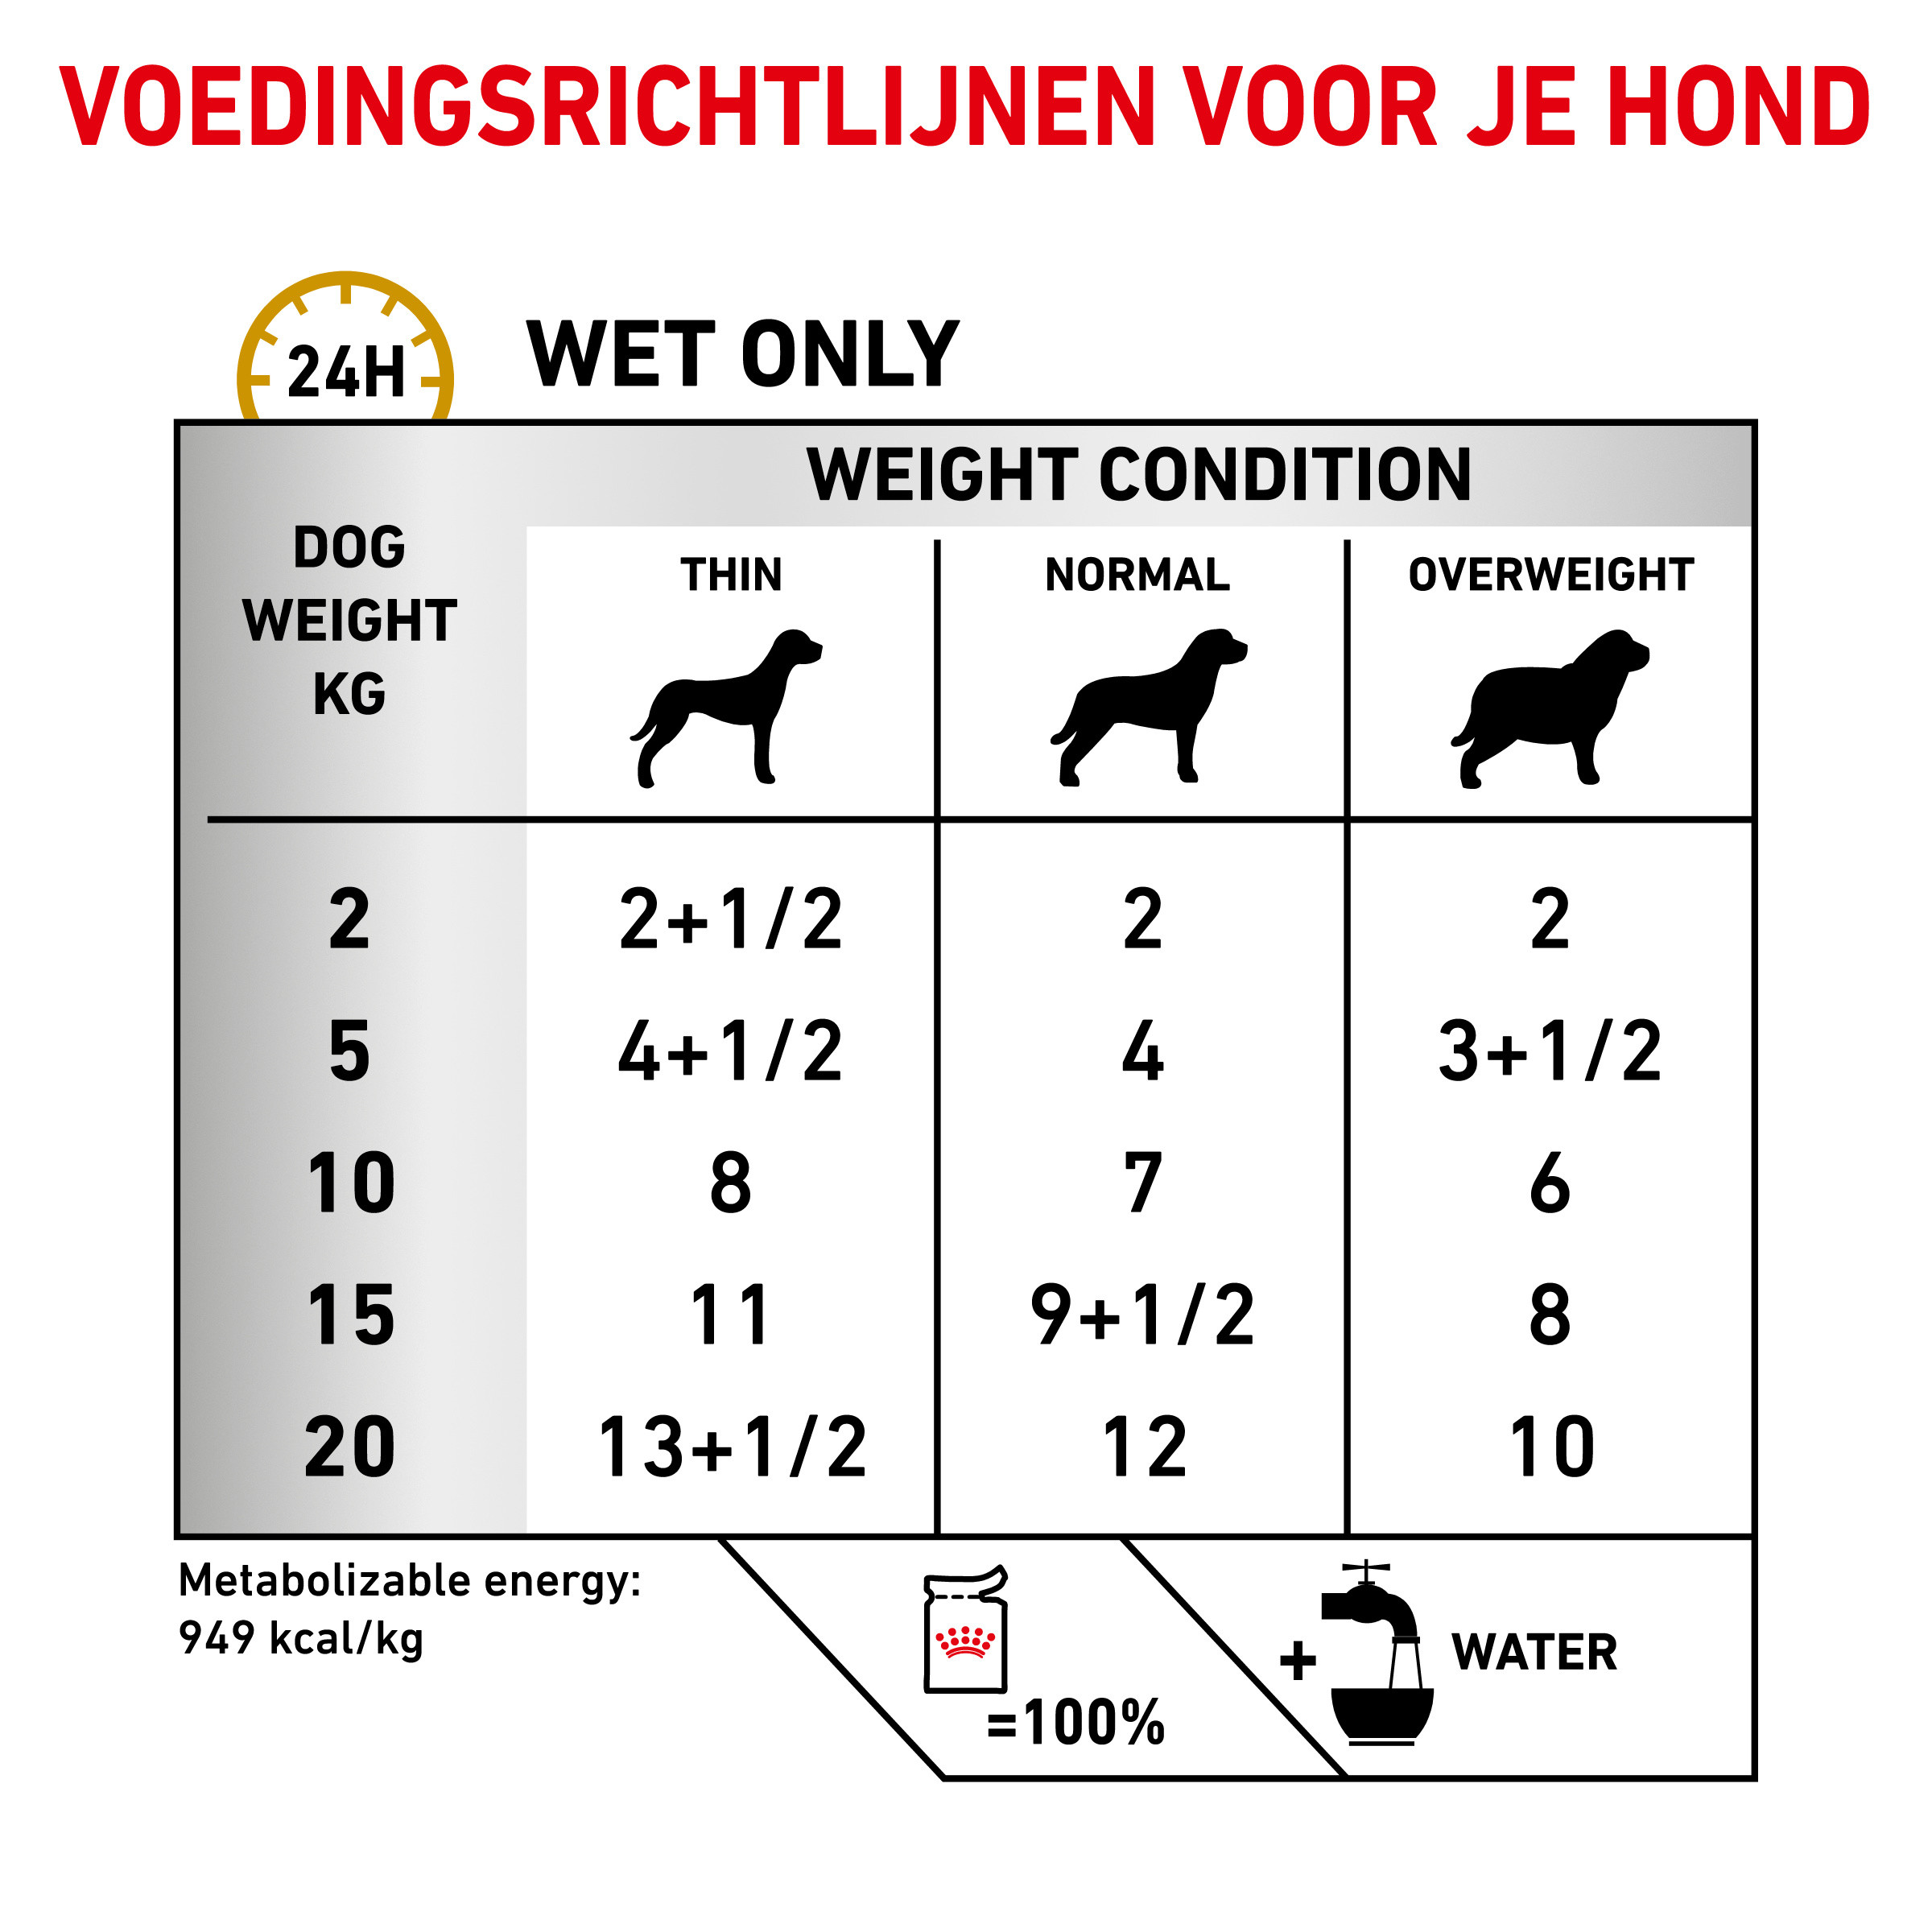 Royal Canin Urinary S/O Ageing 7+ Pouch 85 gr hondenvoer